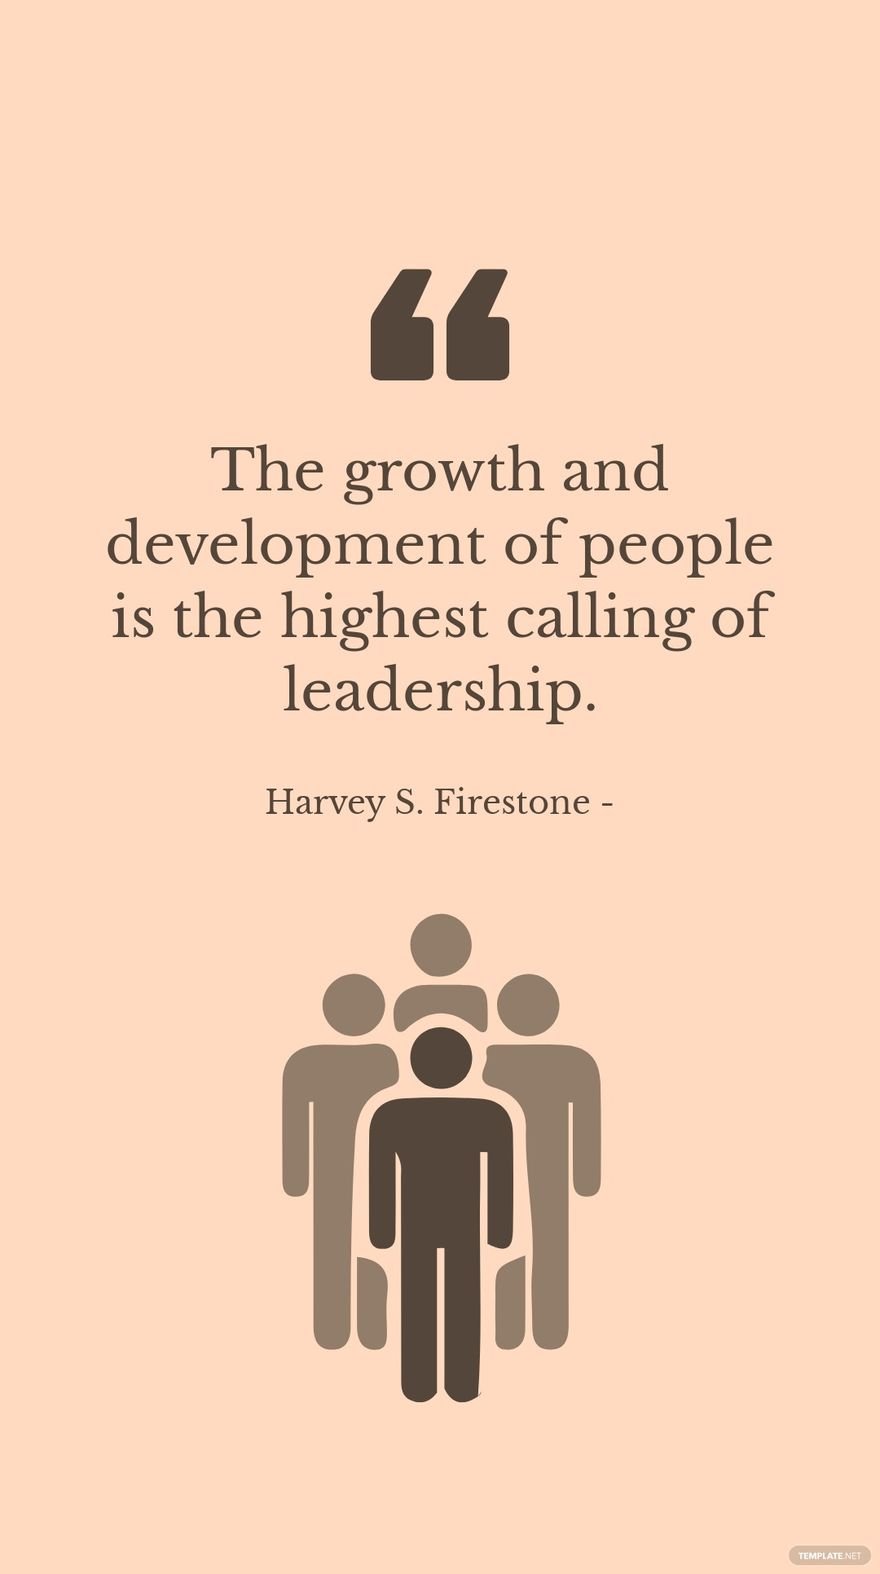 Harvey S. Firestone - The growth and development of people is the highest calling of leadership.